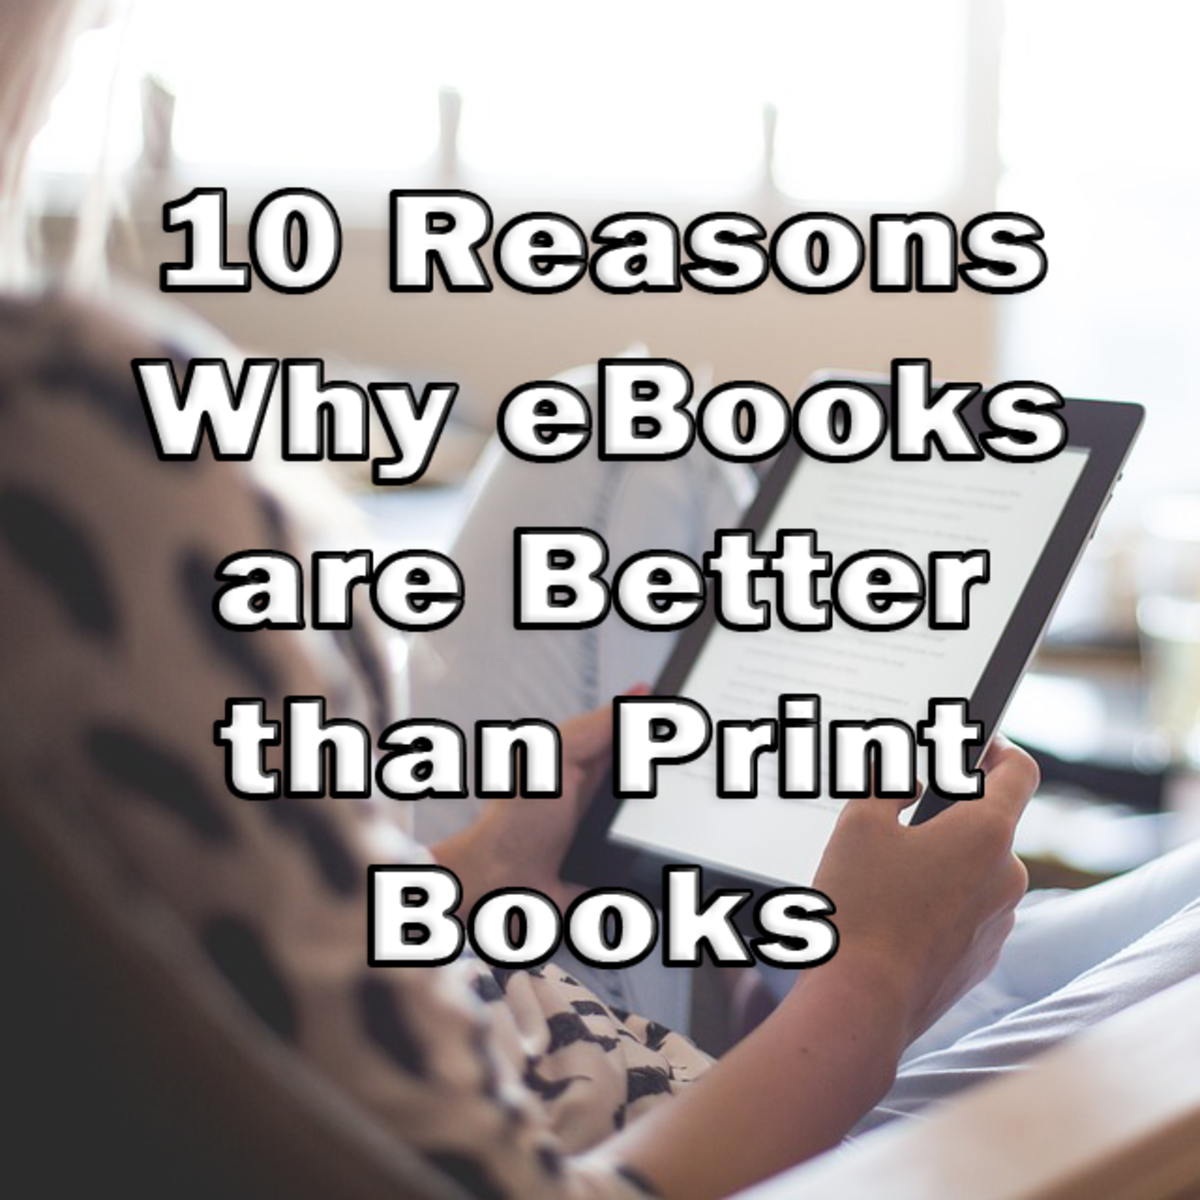 eBooks Can be Better than Print Books